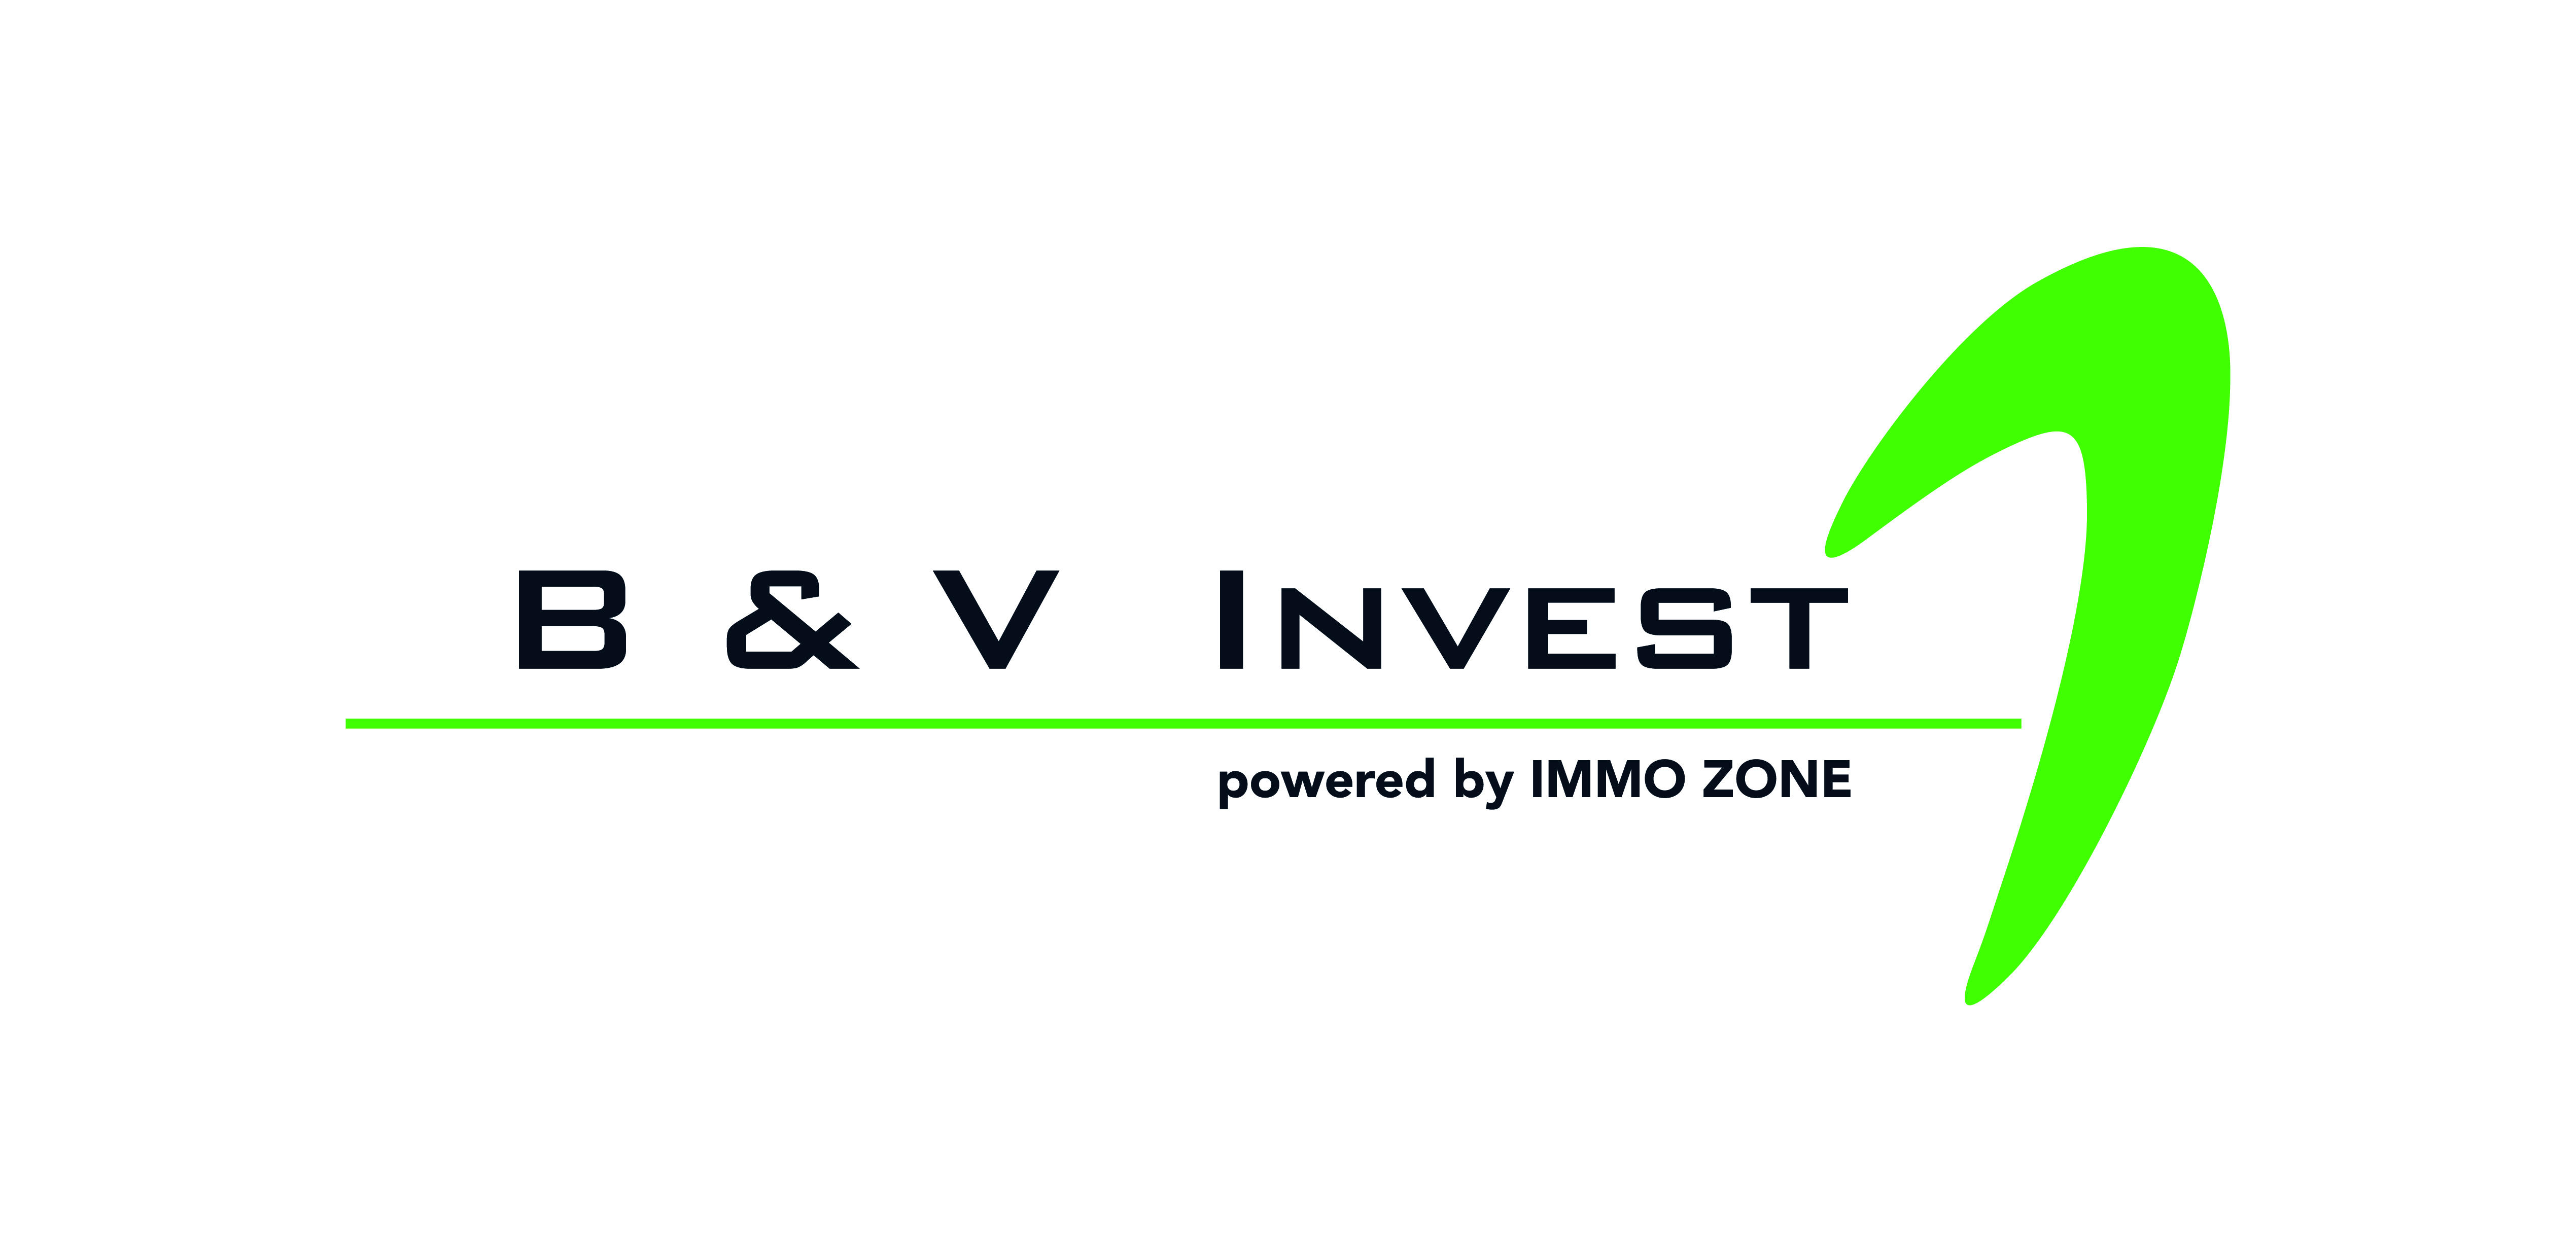 B&V Invest powered by Immo Zone